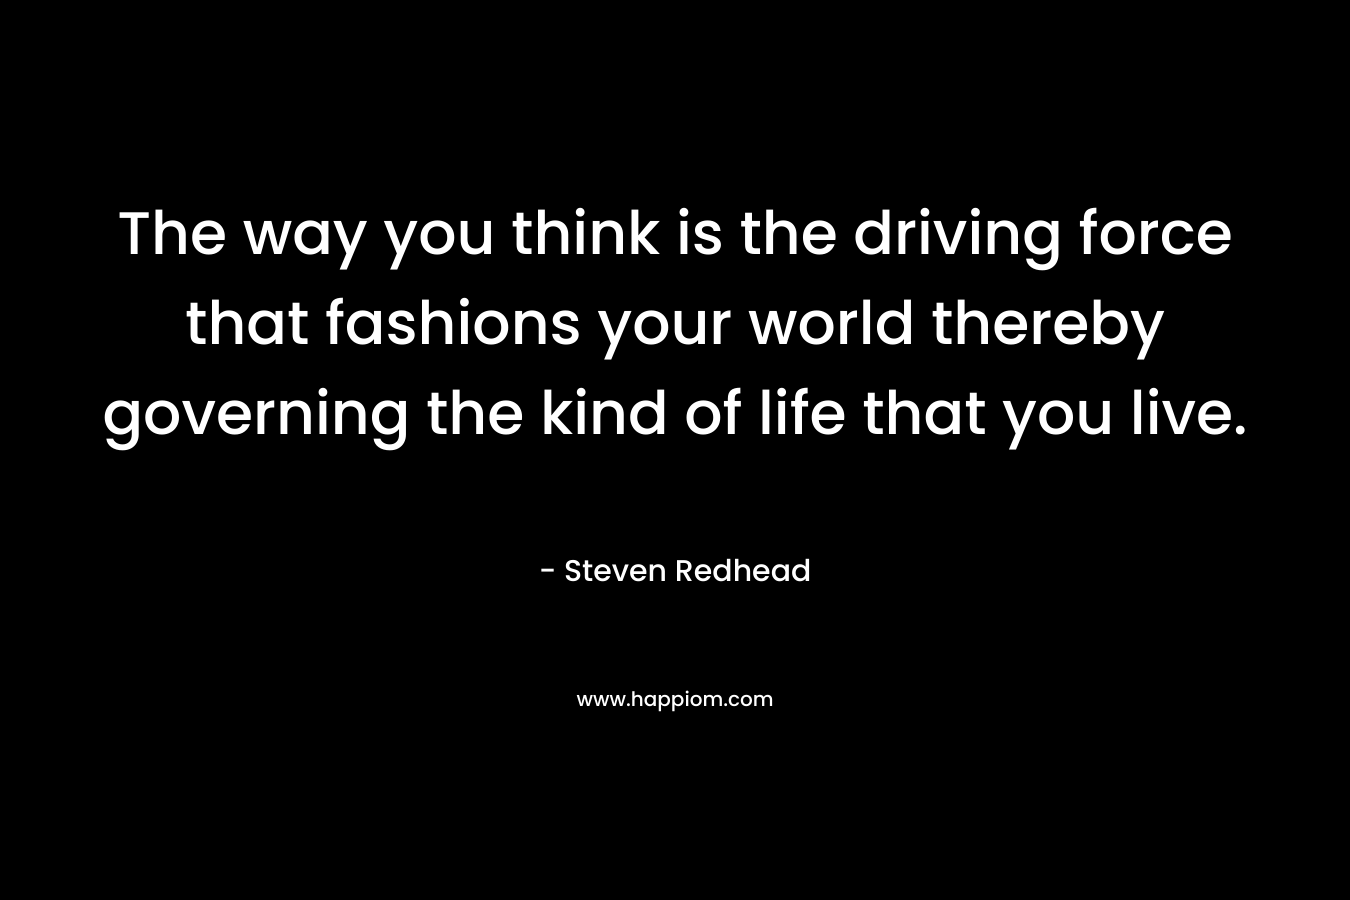 The way you think is the driving force that fashions your world thereby governing the kind of life that you live. – Steven Redhead